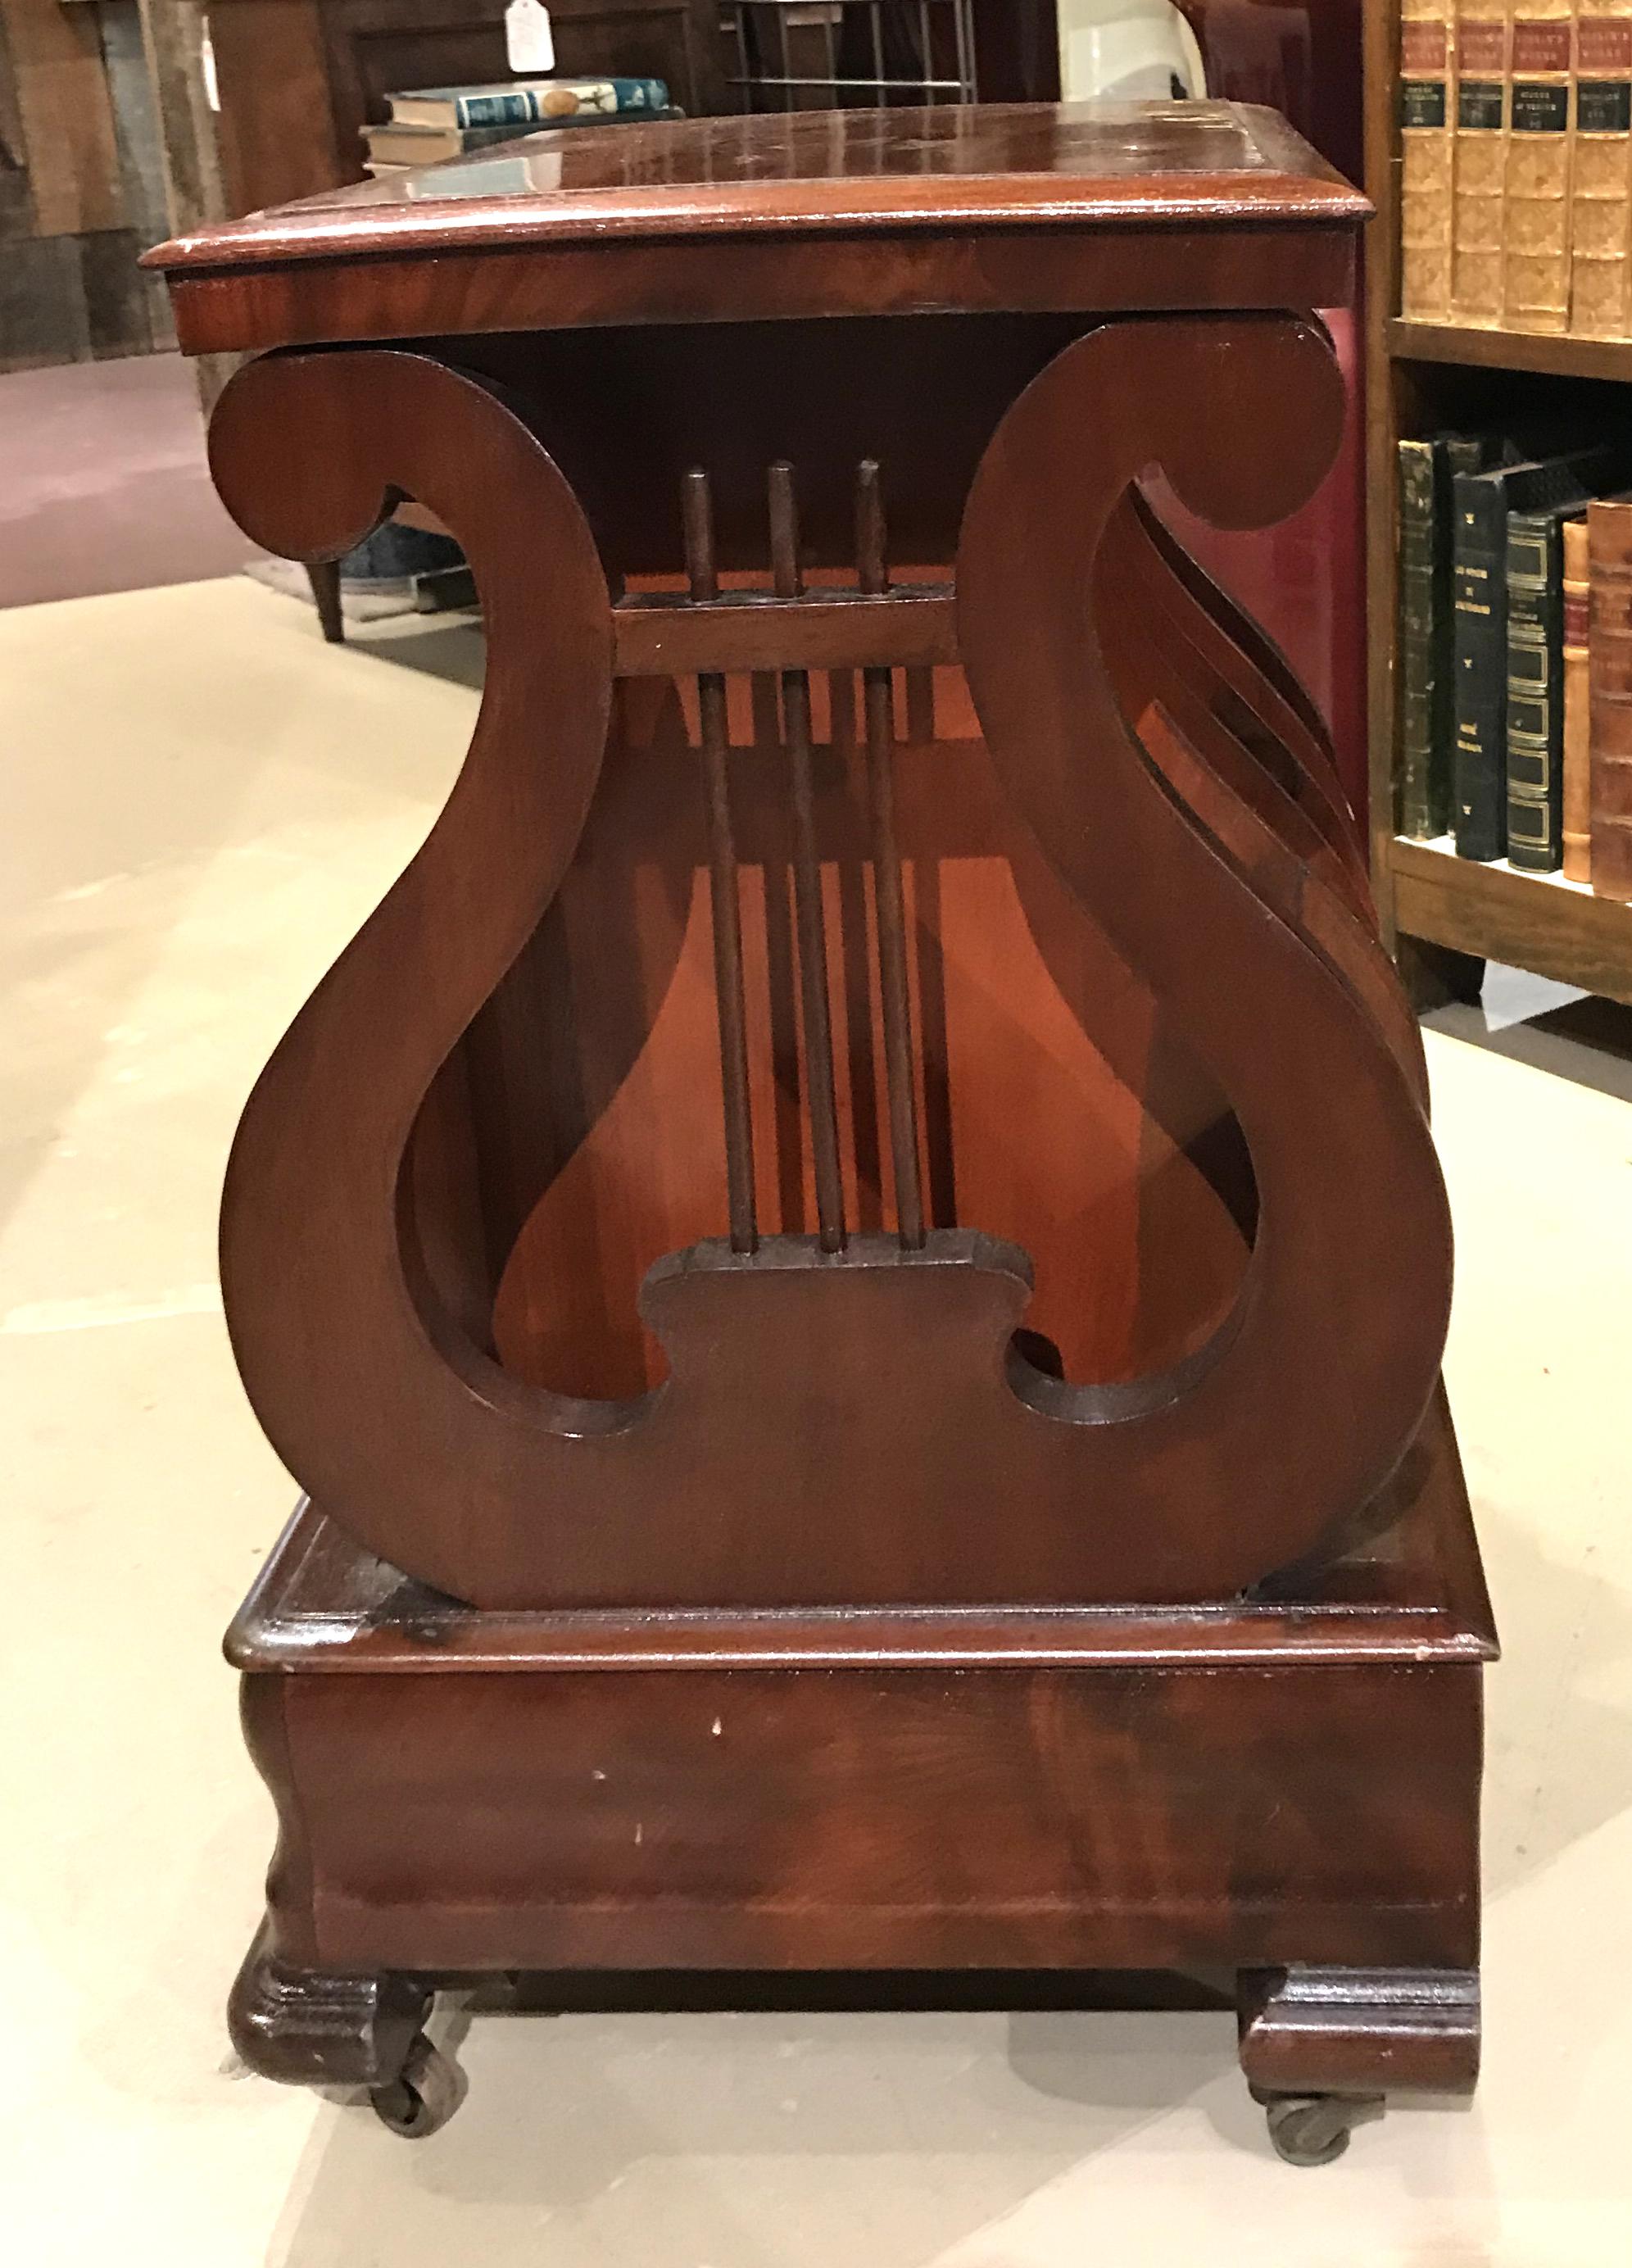 A fine mahogany lyre form Canterbury for sheet music with brass casters. American, dating to the 19th century, in very good overall condition, with a few surface rubs, scratches, and expected wear from age and use. Dimensions: 23 in H x 18 in W x